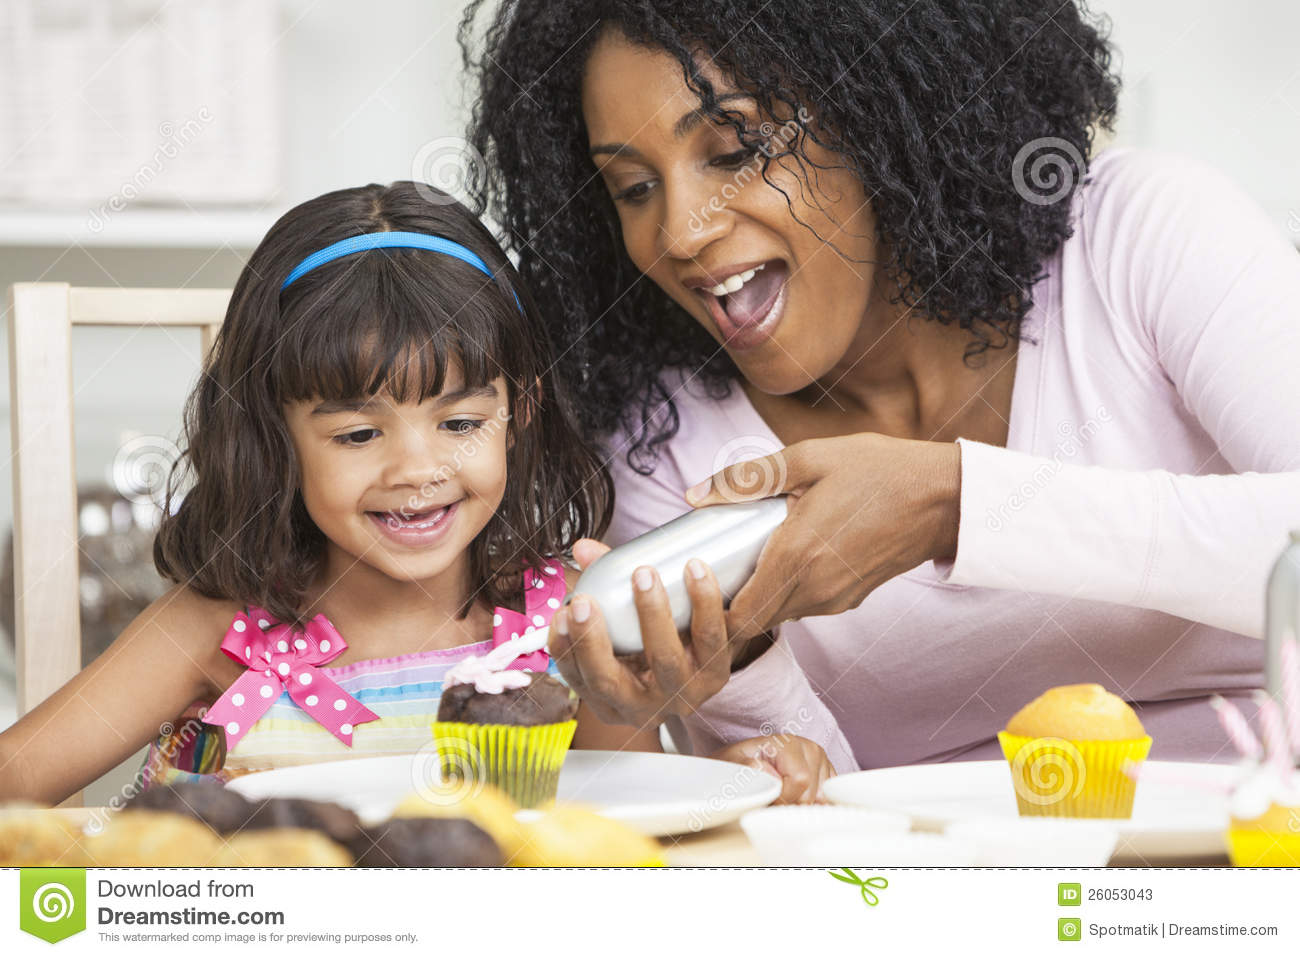 African American Mother And Mixed Race Daughter Having Fun Frosting